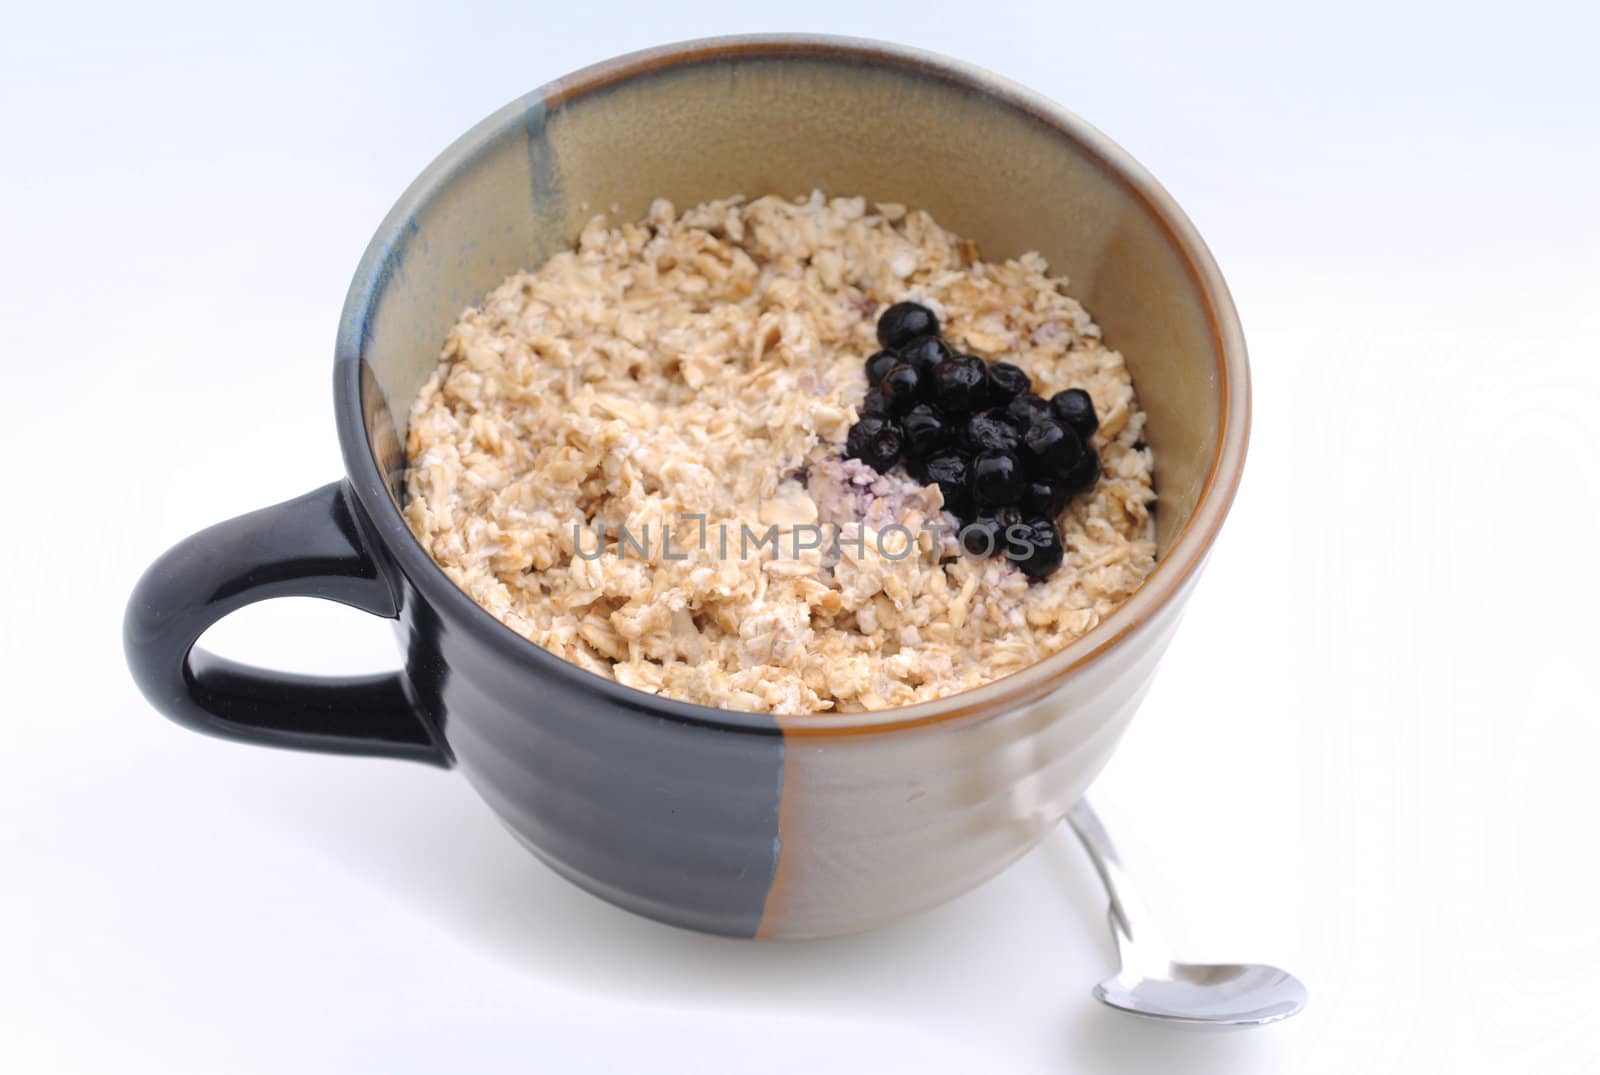 Hearty breakfast of oatmeal and blueberries in large mug